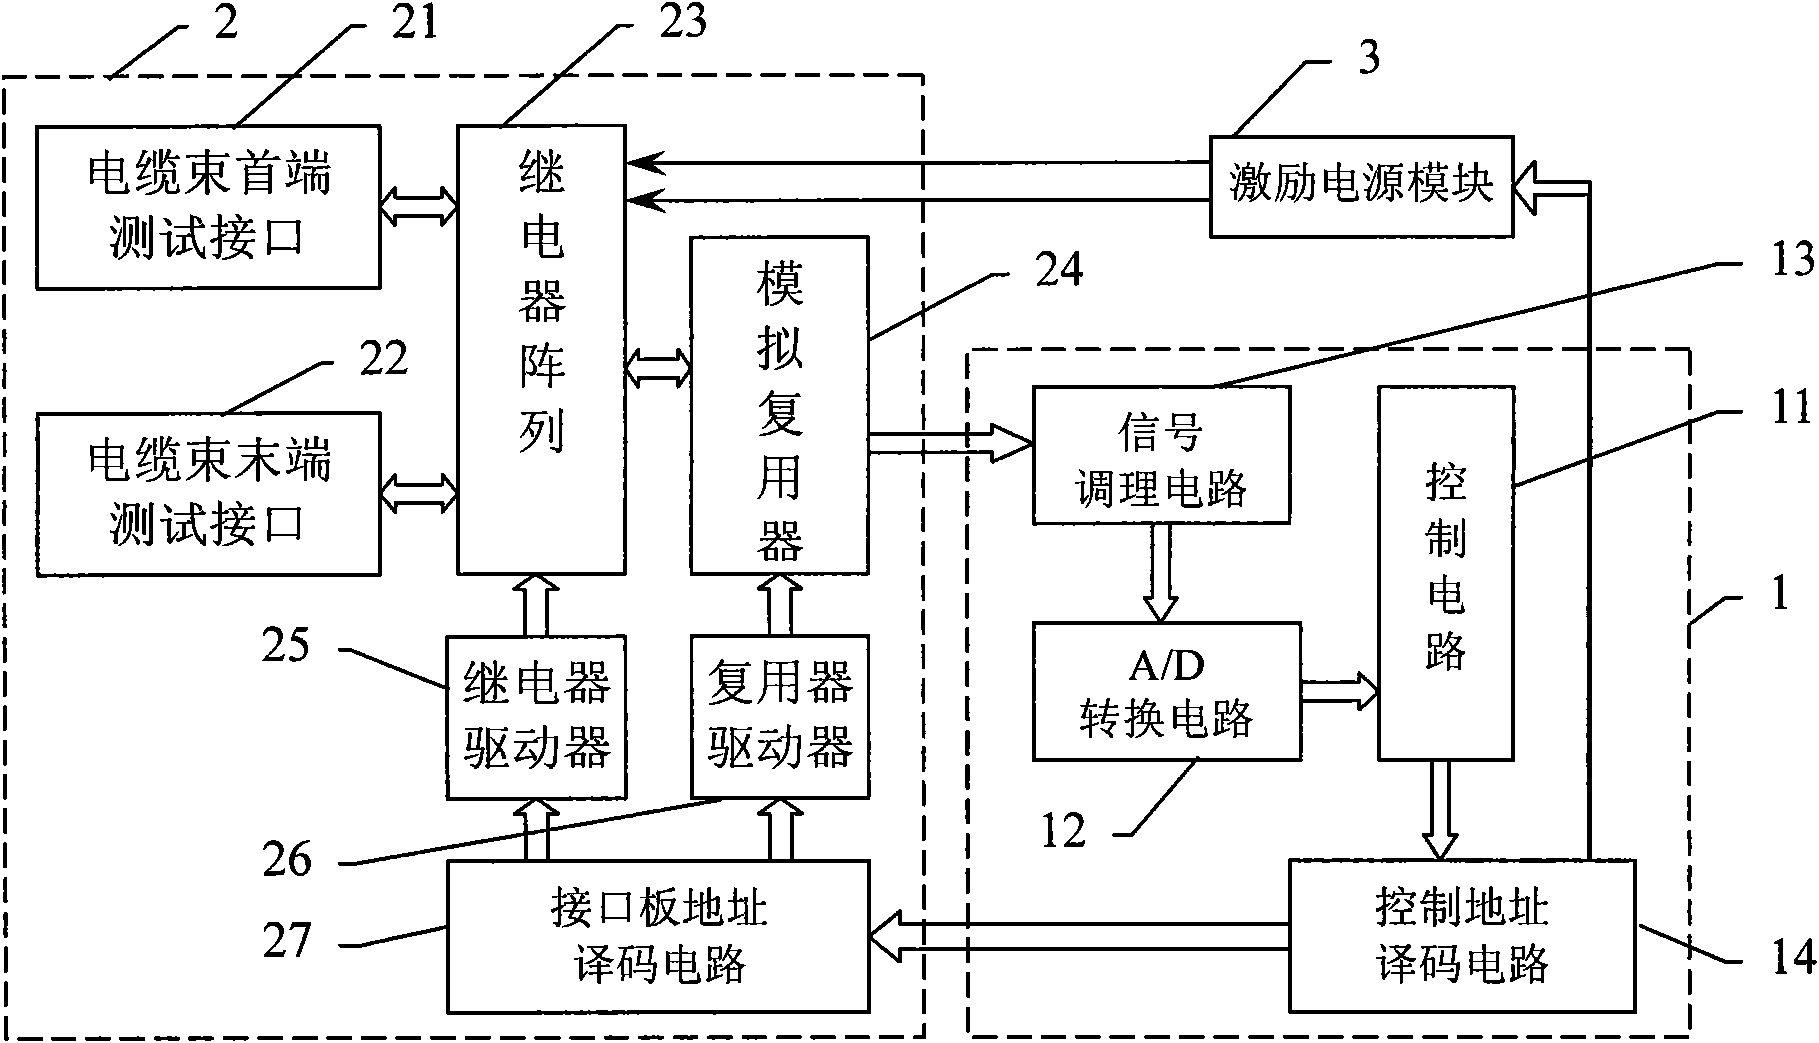 Device for automatically testing performance of cable bunch